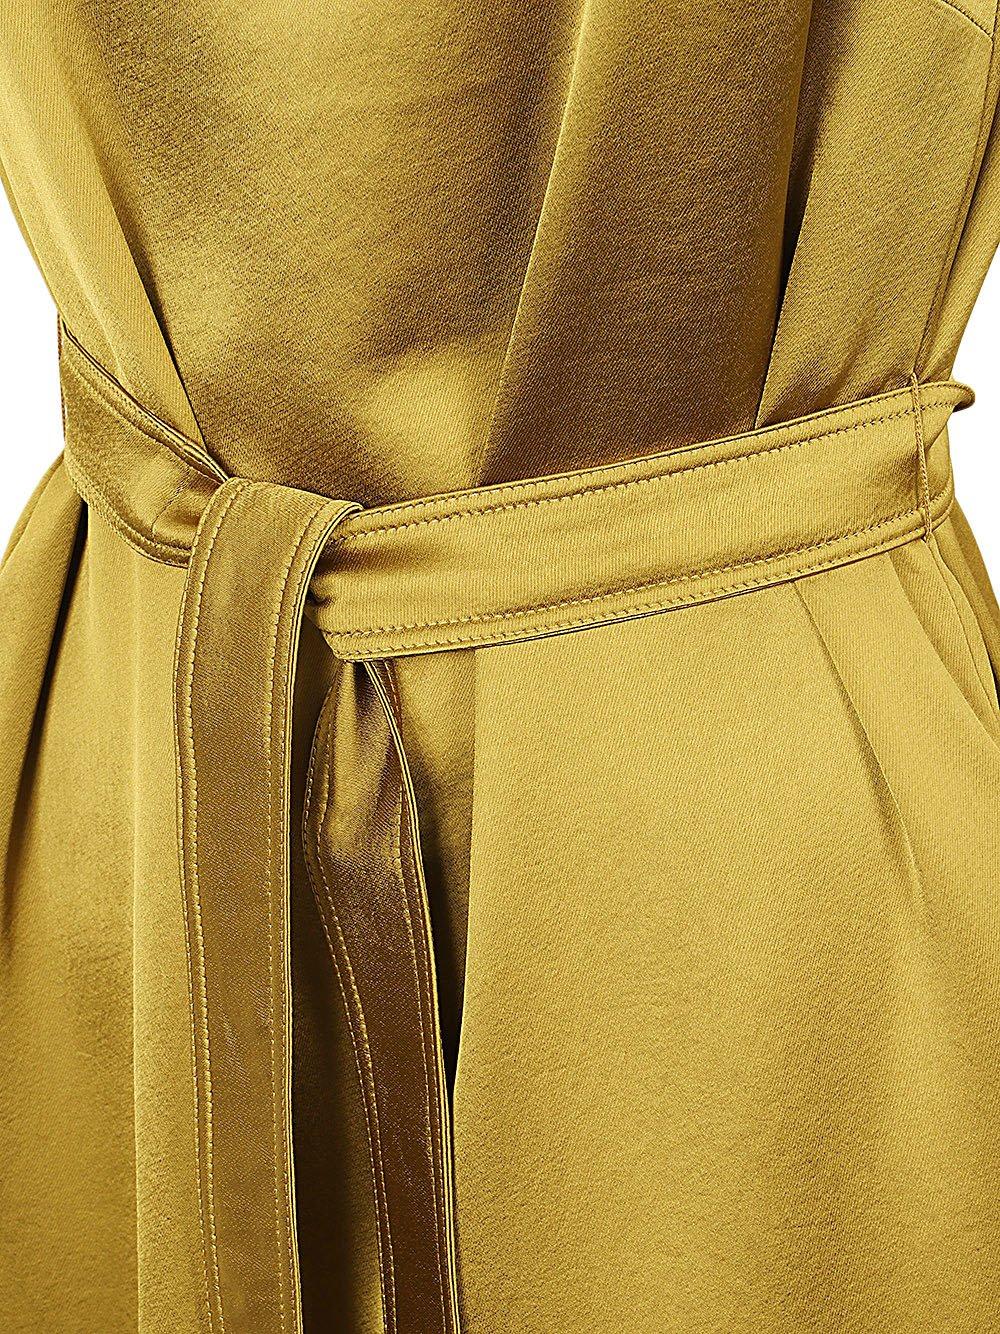 Shop Weekend Max Mara Belted Satin Dress In Giallo